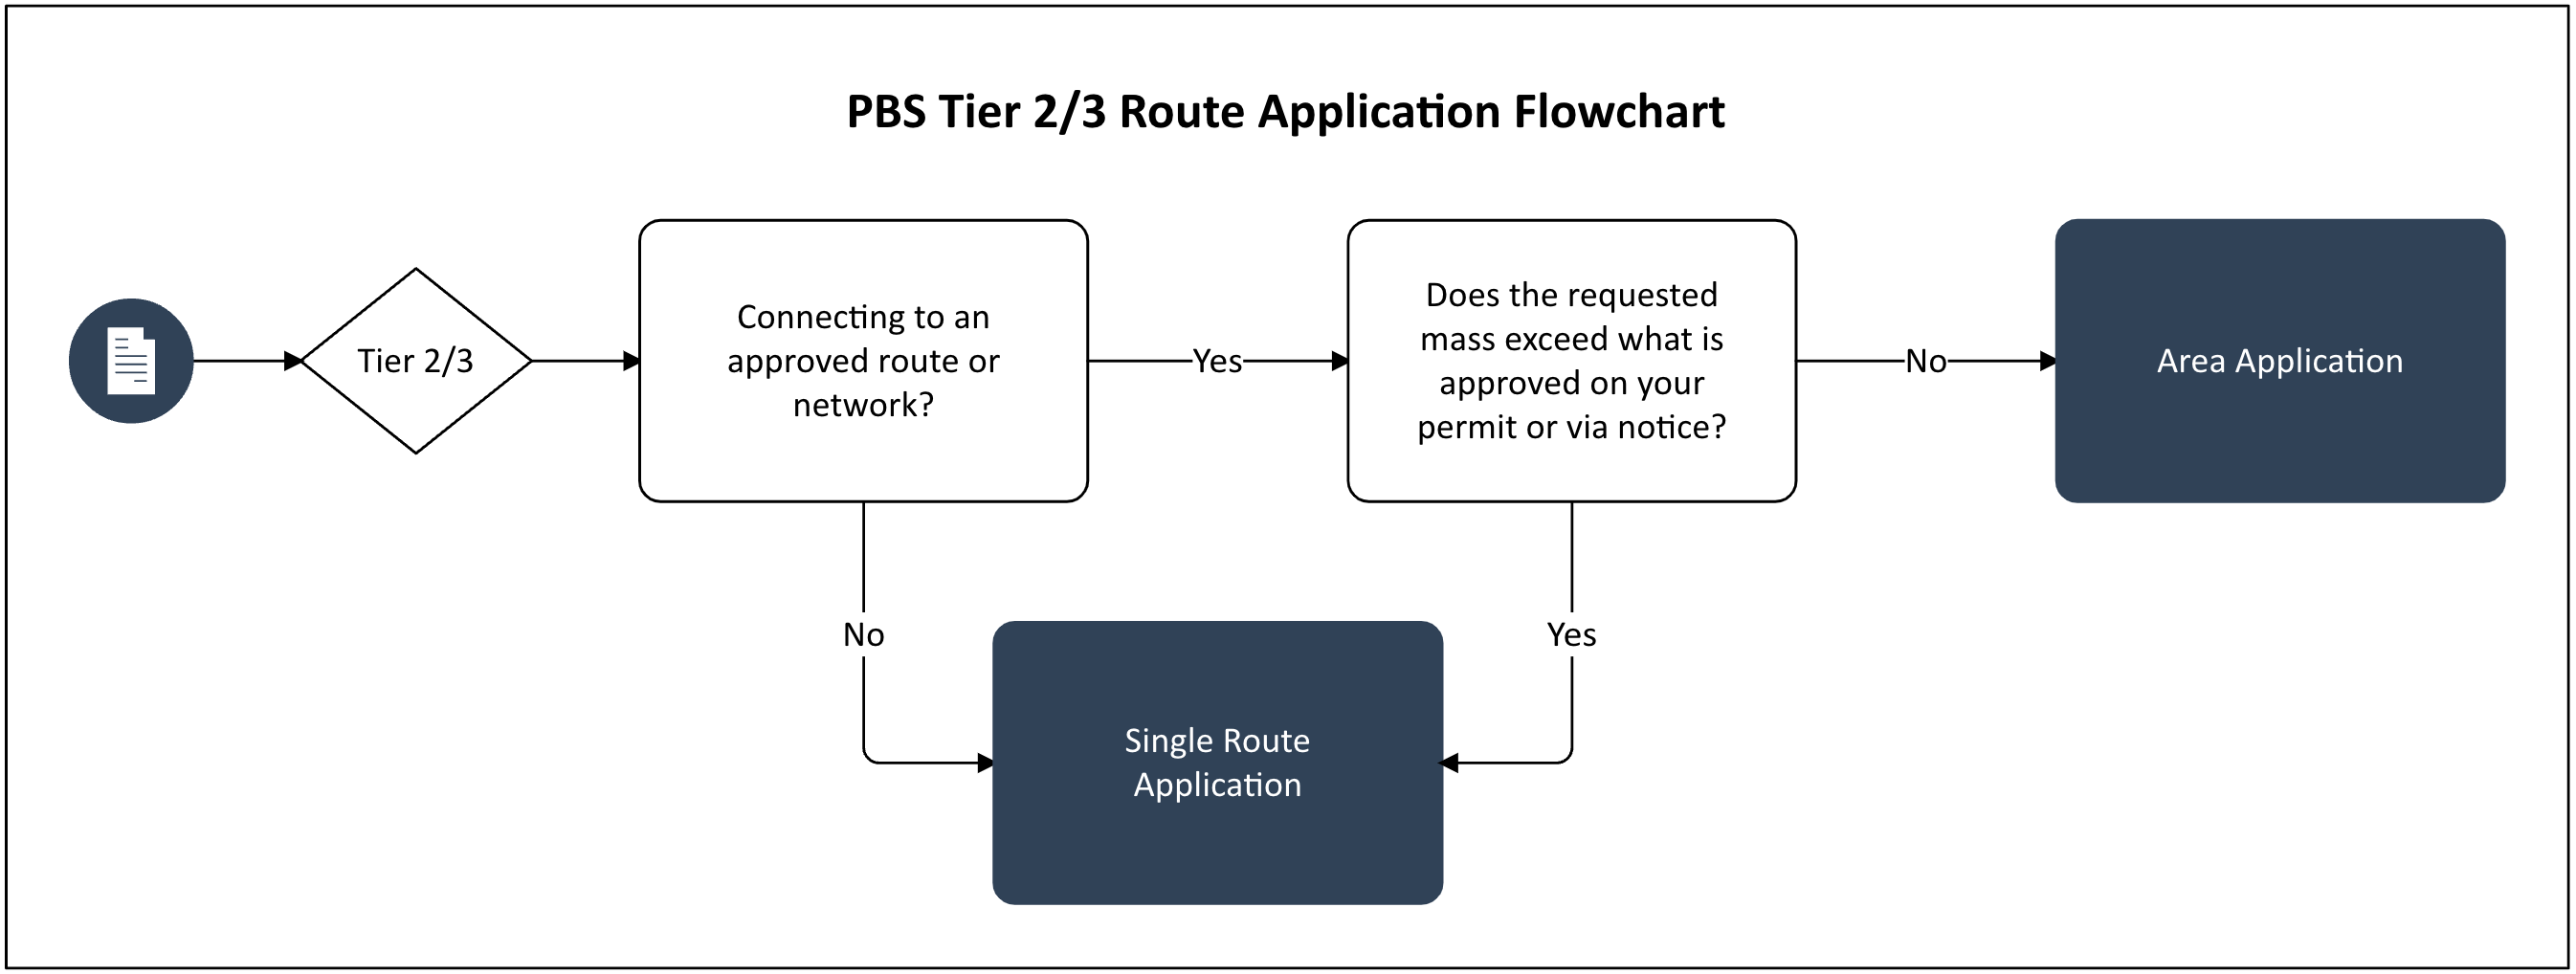 image is of route application flowchart for tier 2/3